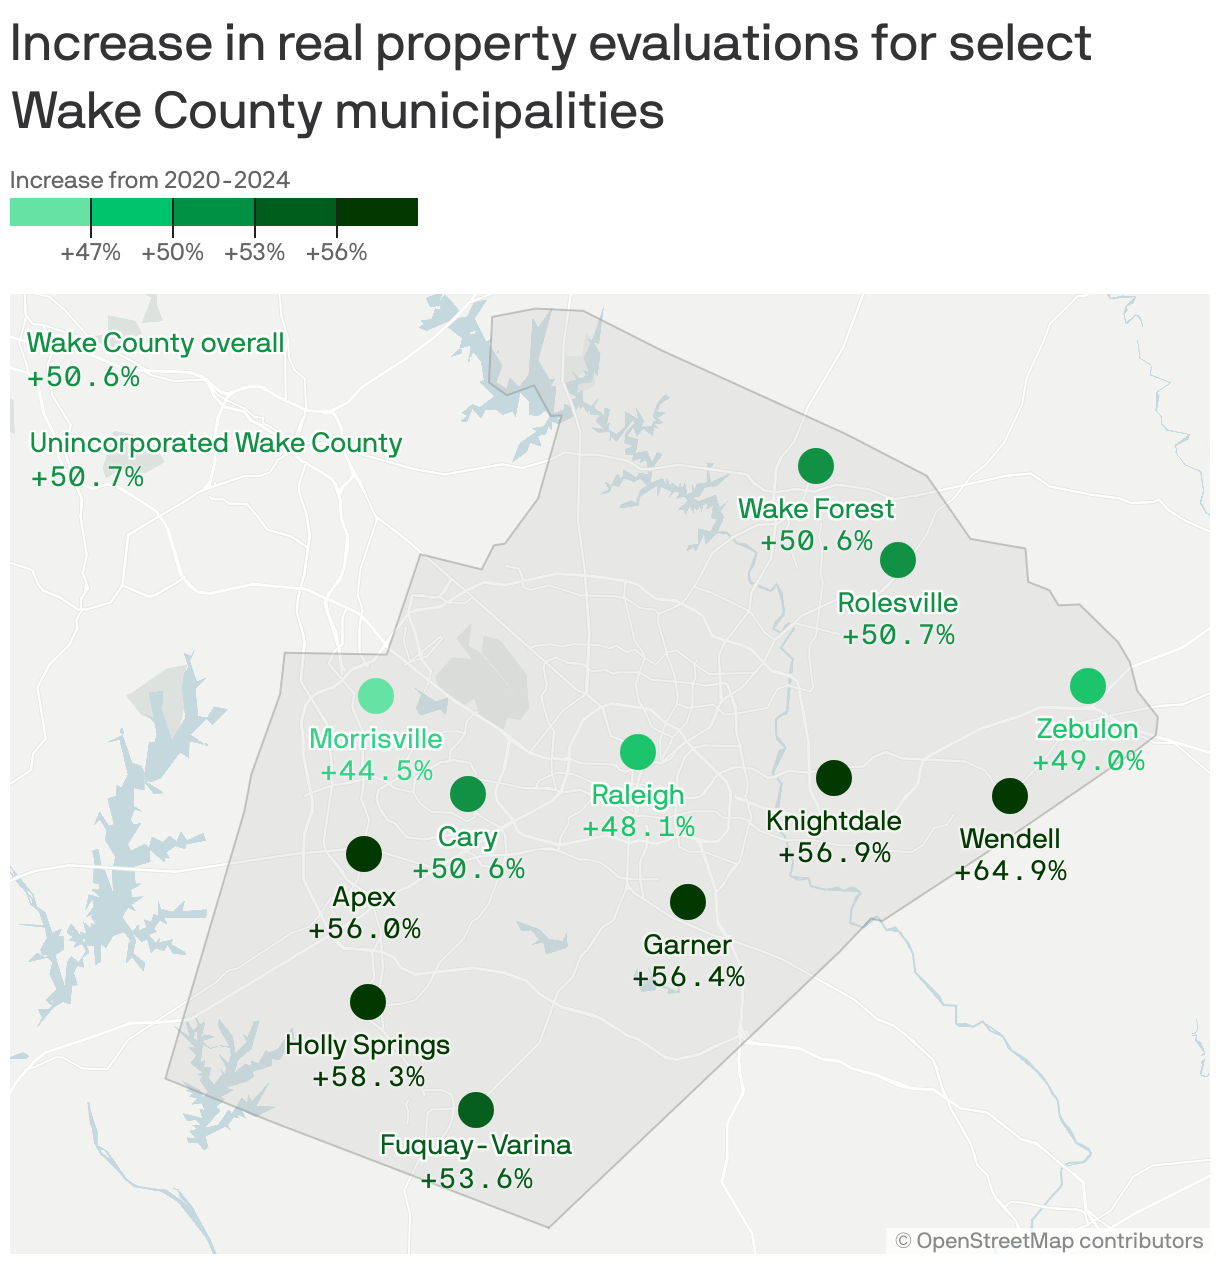 Increase in real property evaluations for select Wake County municipalities